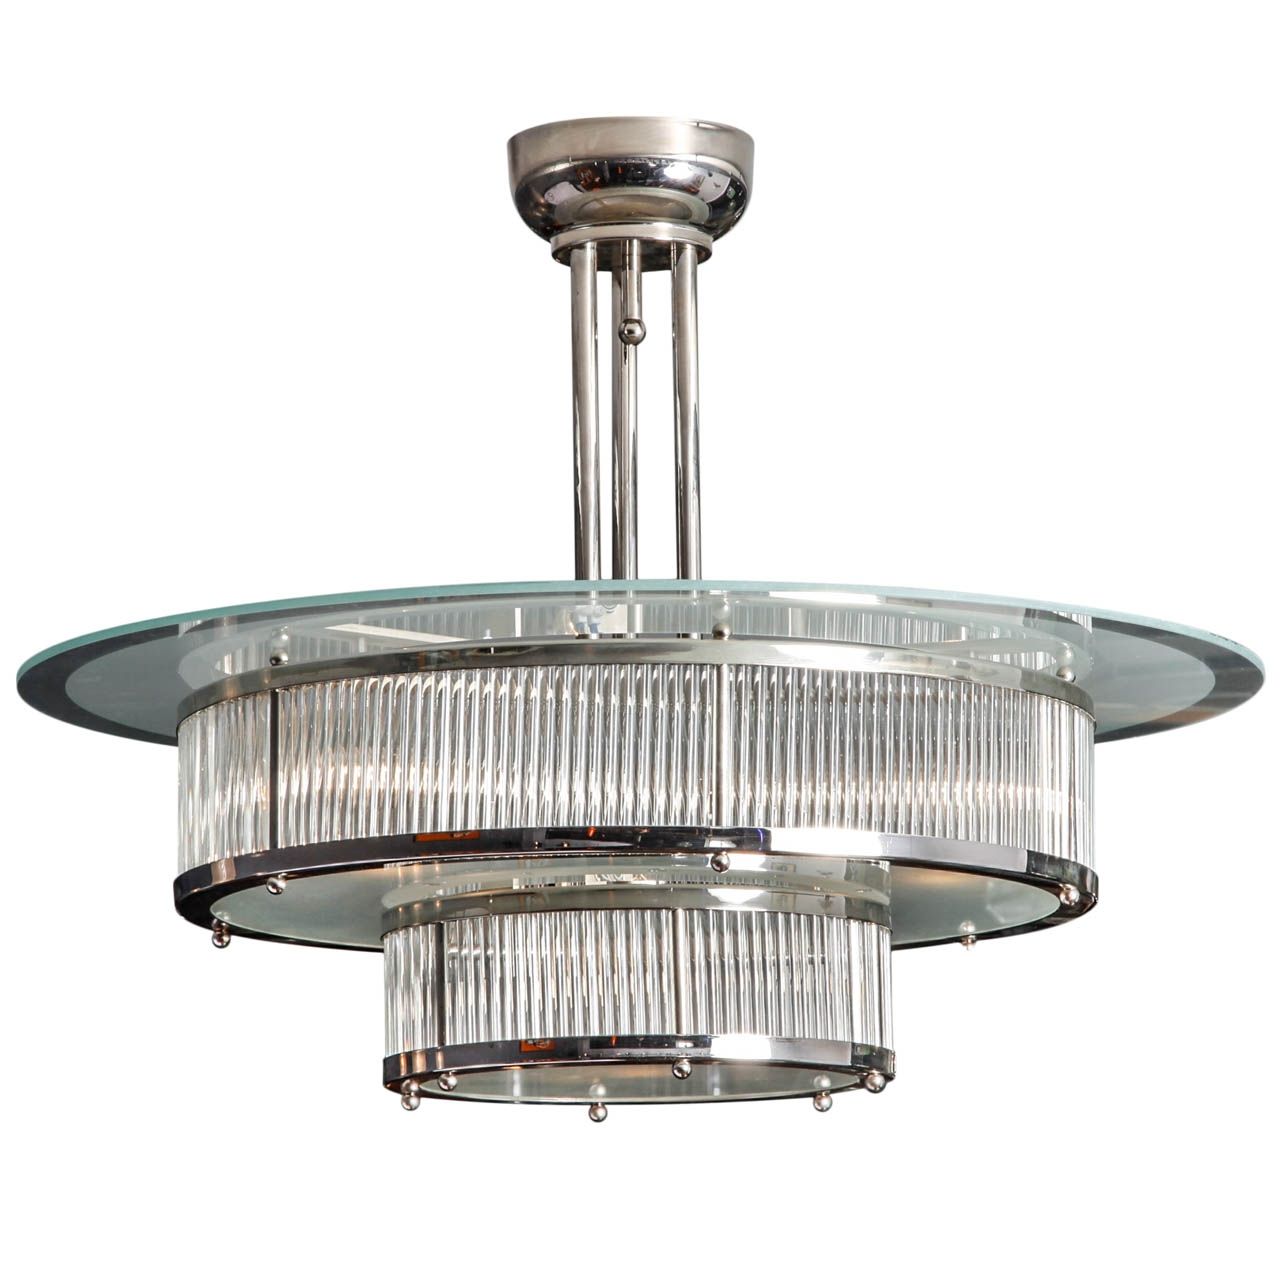 French Art Deco Pendant Chandelier Atelier Petitot Modernism Intended For Art Deco Chandeliers (View 2 of 12)